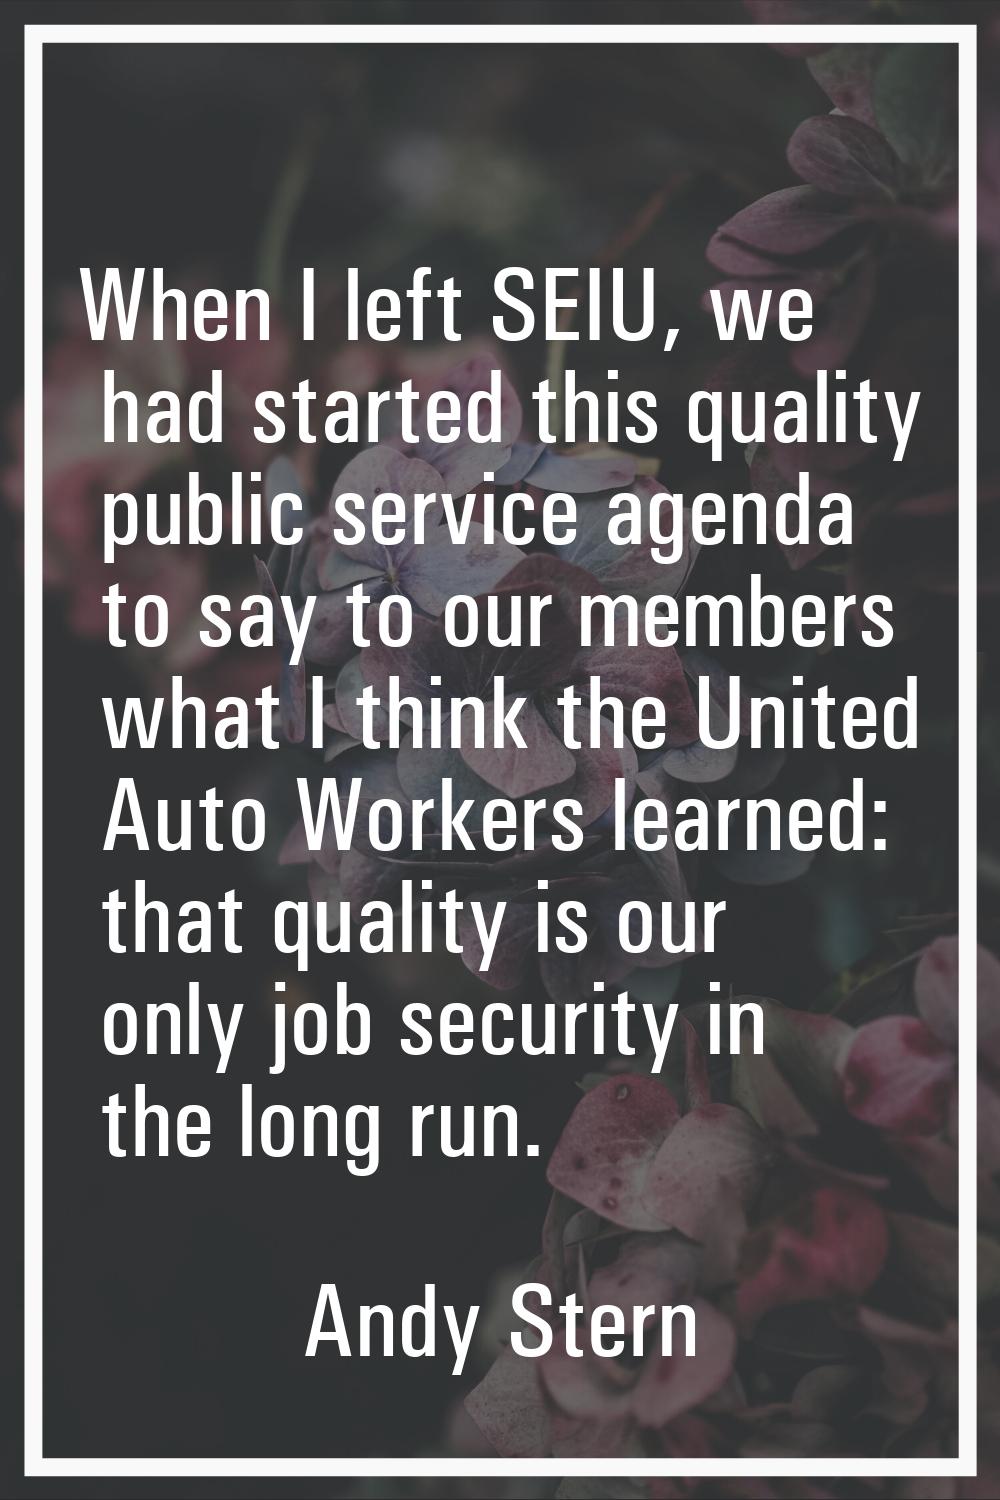 When I left SEIU, we had started this quality public service agenda to say to our members what I th